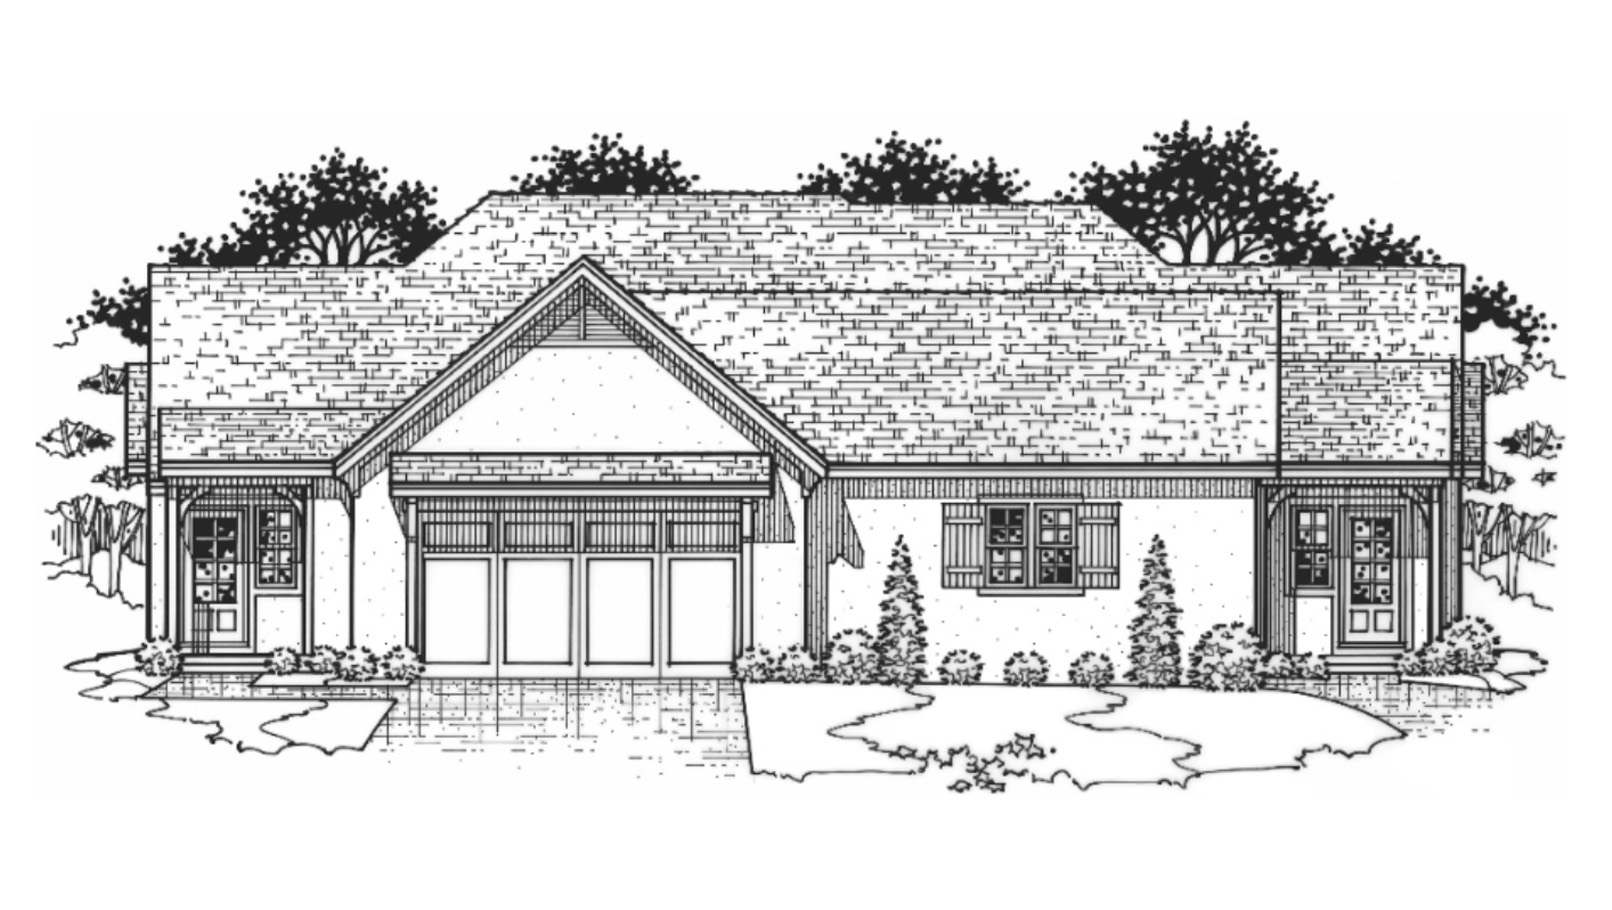 Black and white front elevation of the Irving model from Lambie Homes